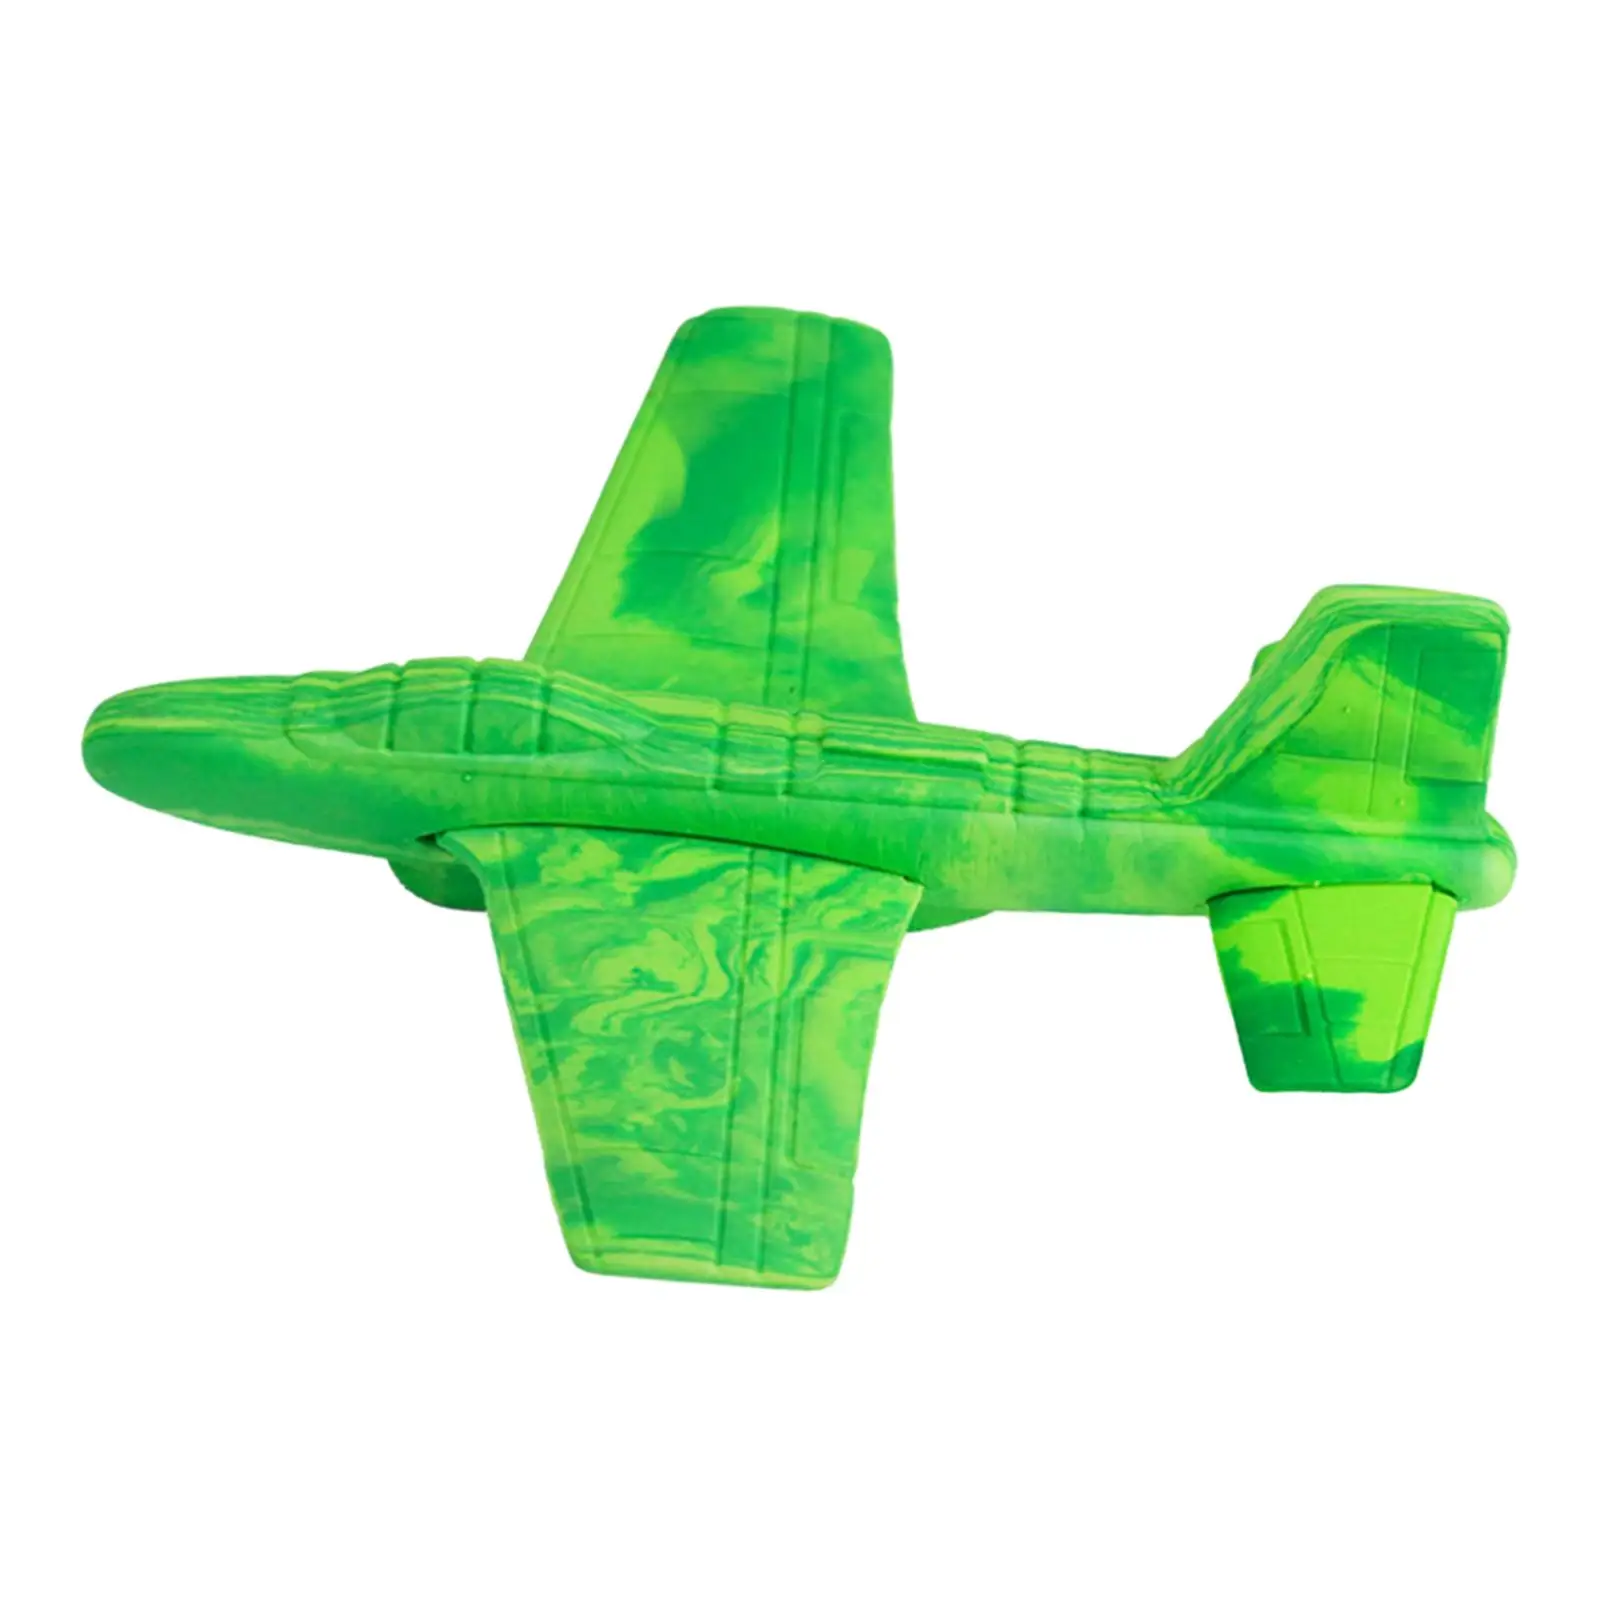 Foam Airplane Toy Backyard Hand Throwing Flying Toy Throwing Foam Plane Glider Toy for Boys Children Beginners Girls Party Favor